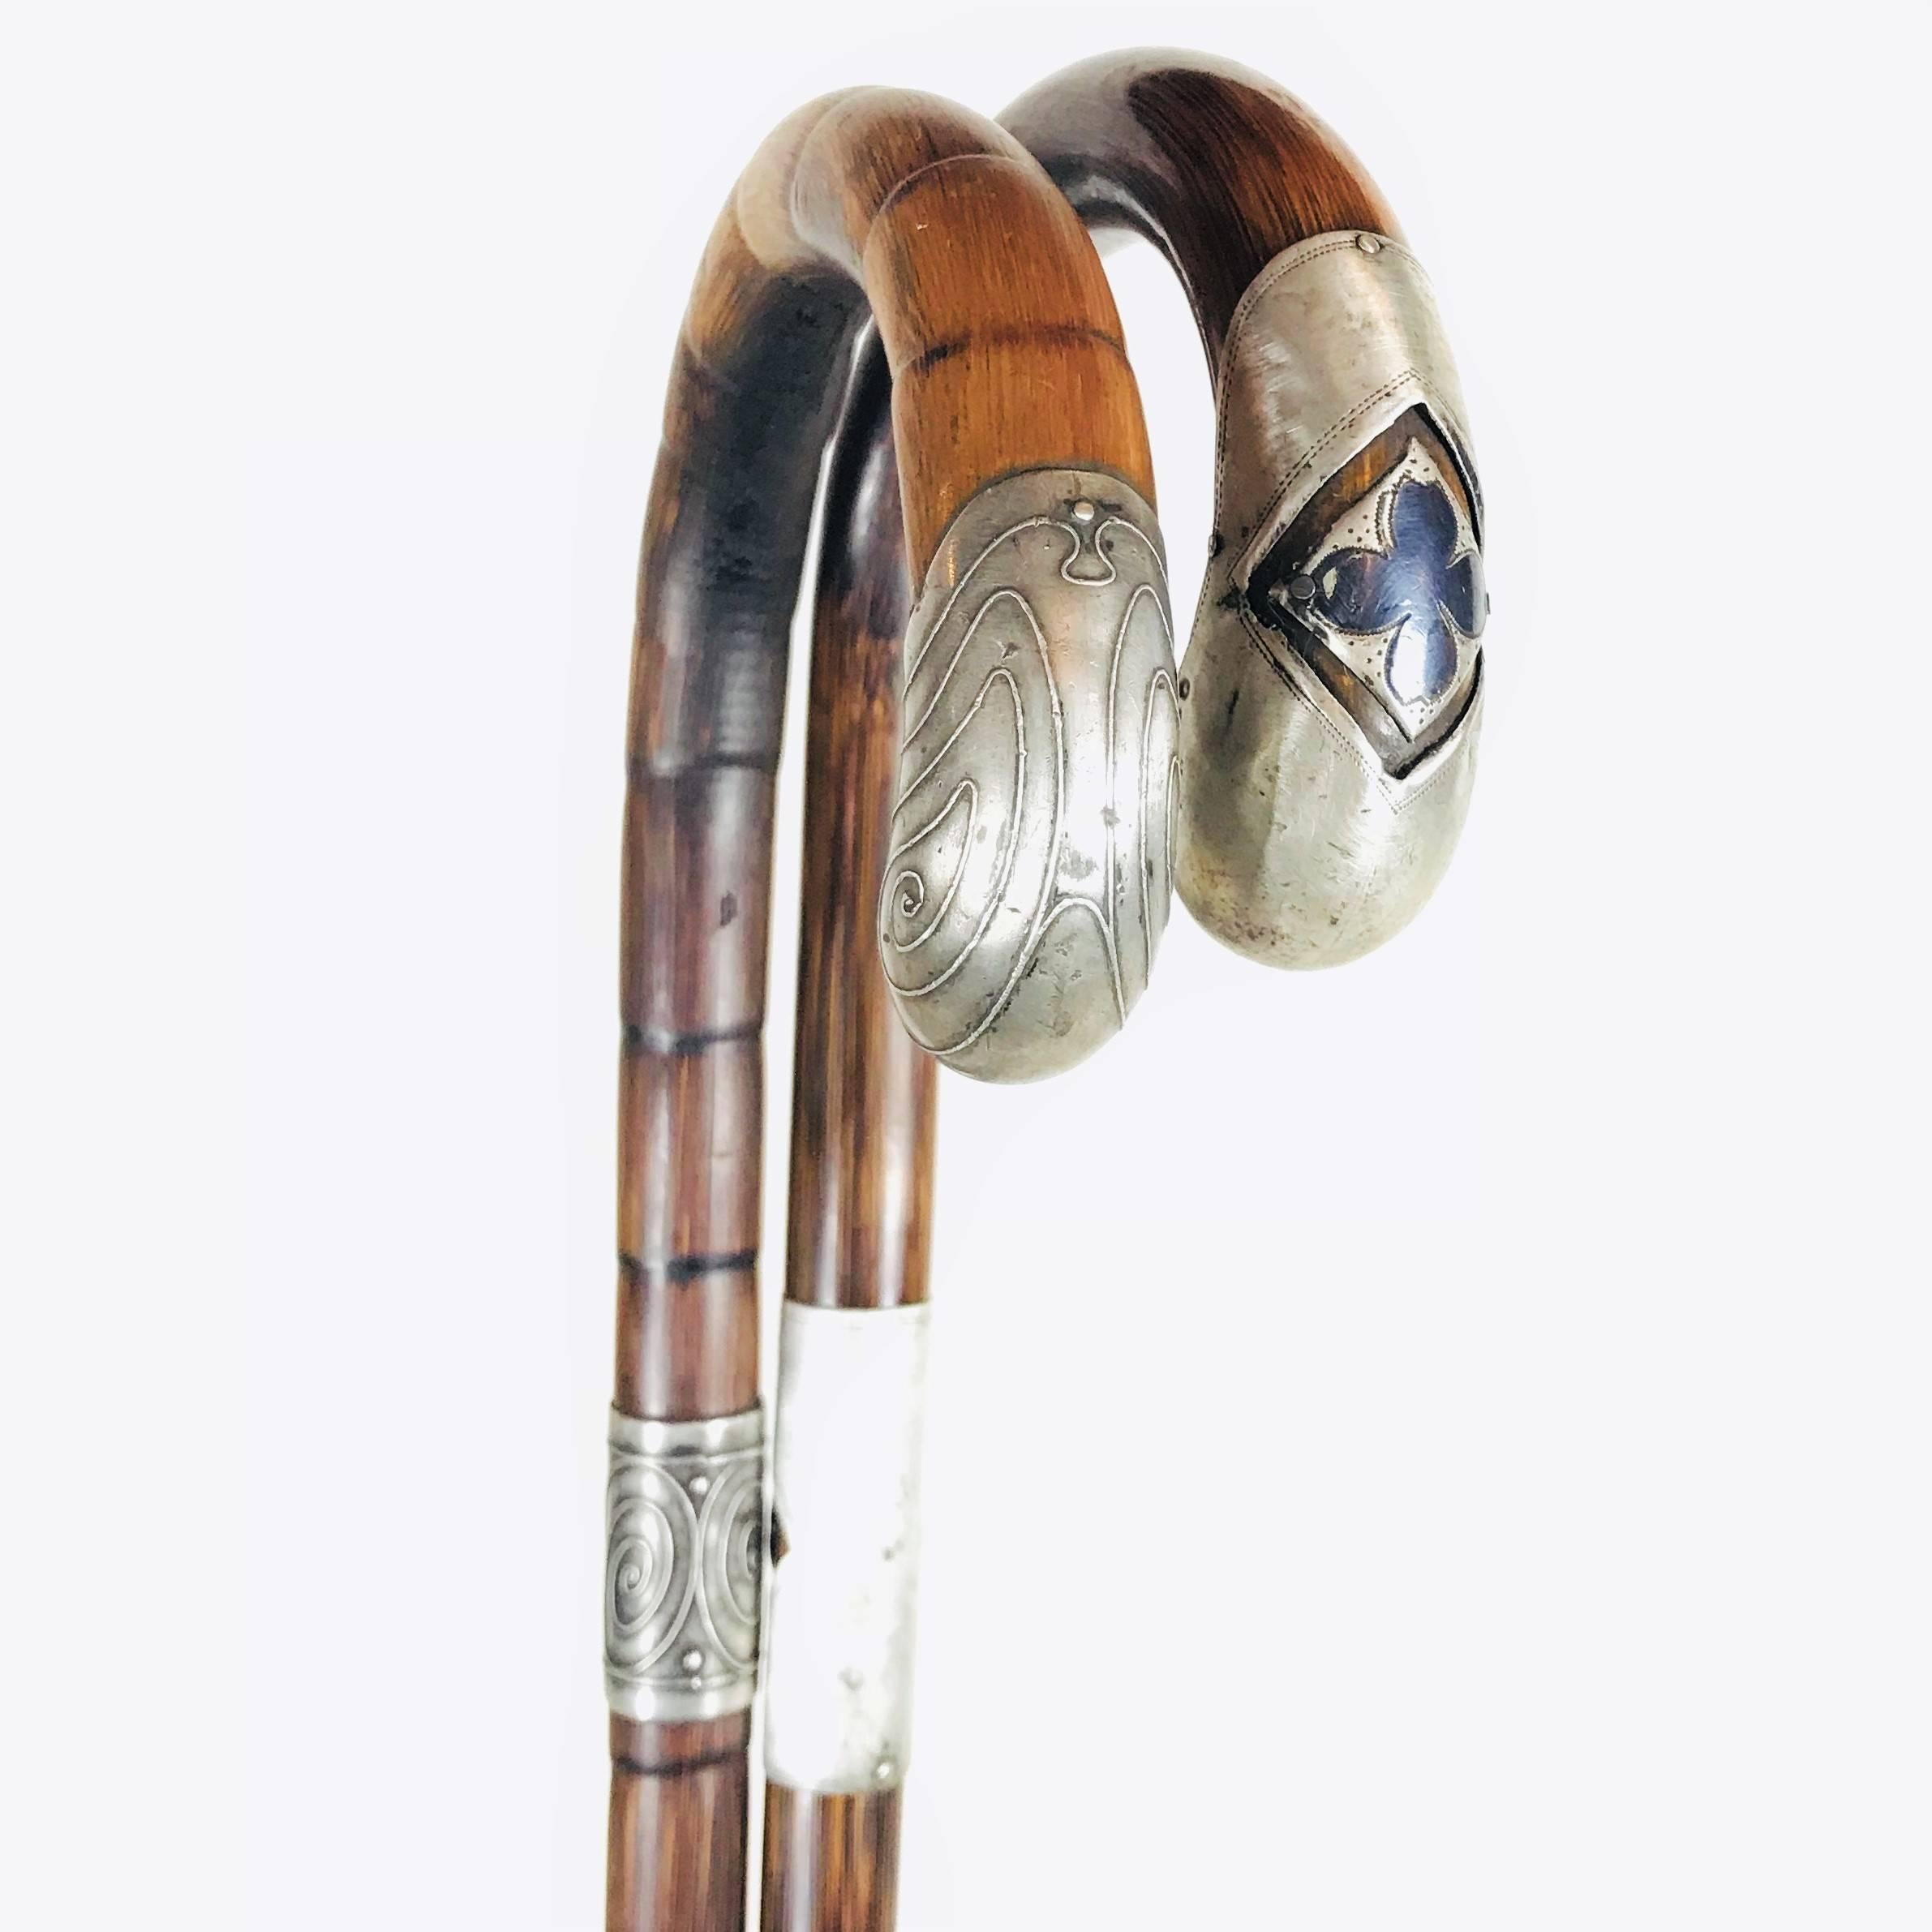 Wonderful silver handled walking canes, creations of Viennese jewelers of the early 20th century in the period of Wiener Werkstaette.
The first stick is made of Fine peacock wood, terminating in a hallmarked silver handle fashioned as Art Nouveau